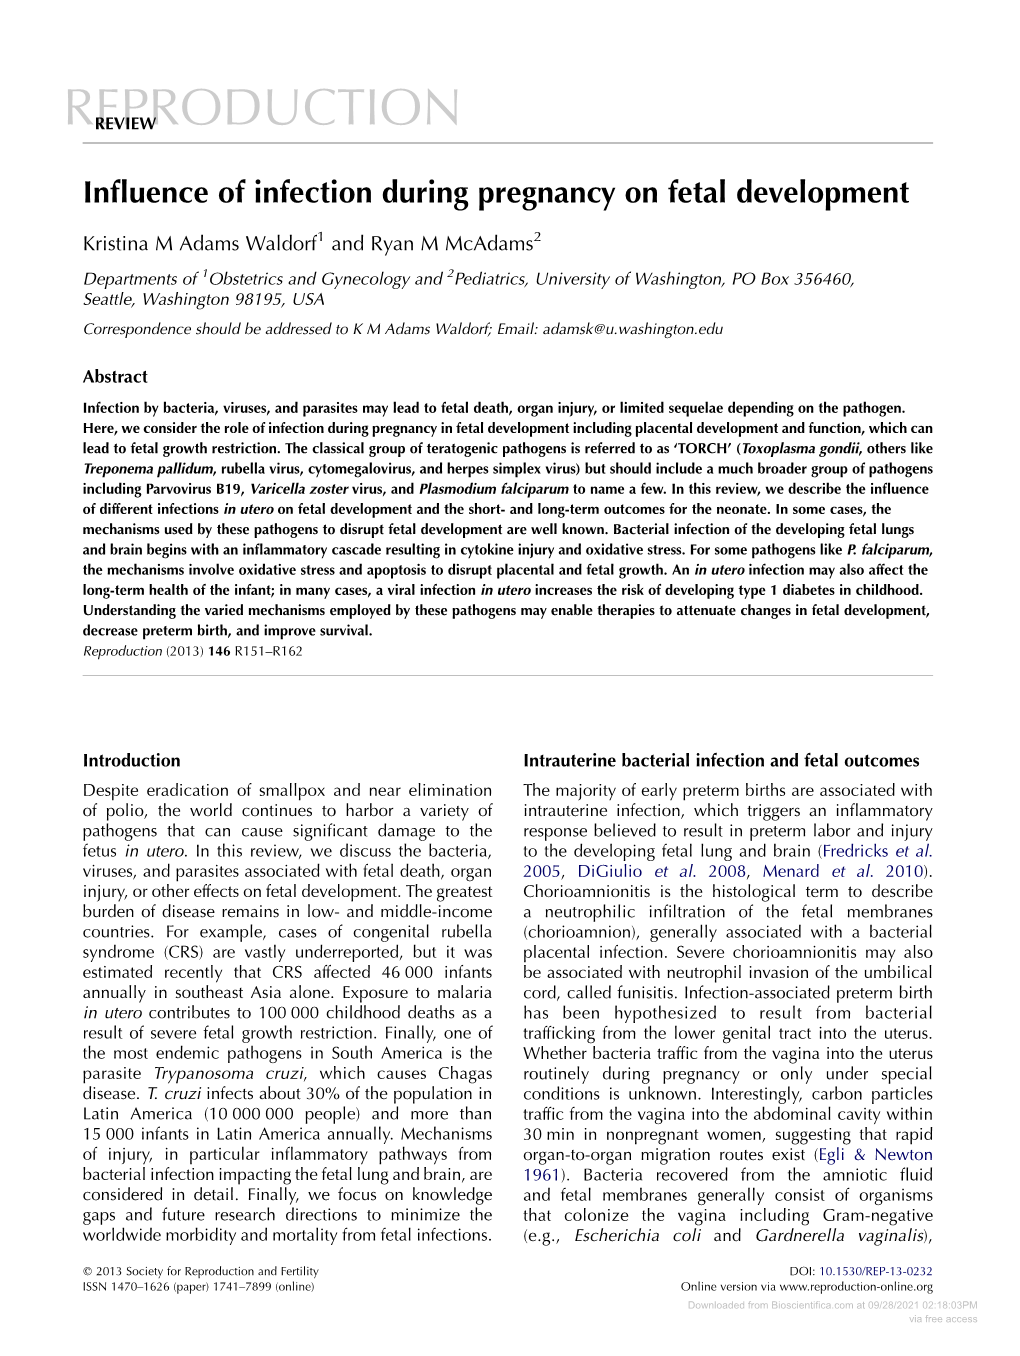 Influence of Infection During Pregnancy on Fetal Development